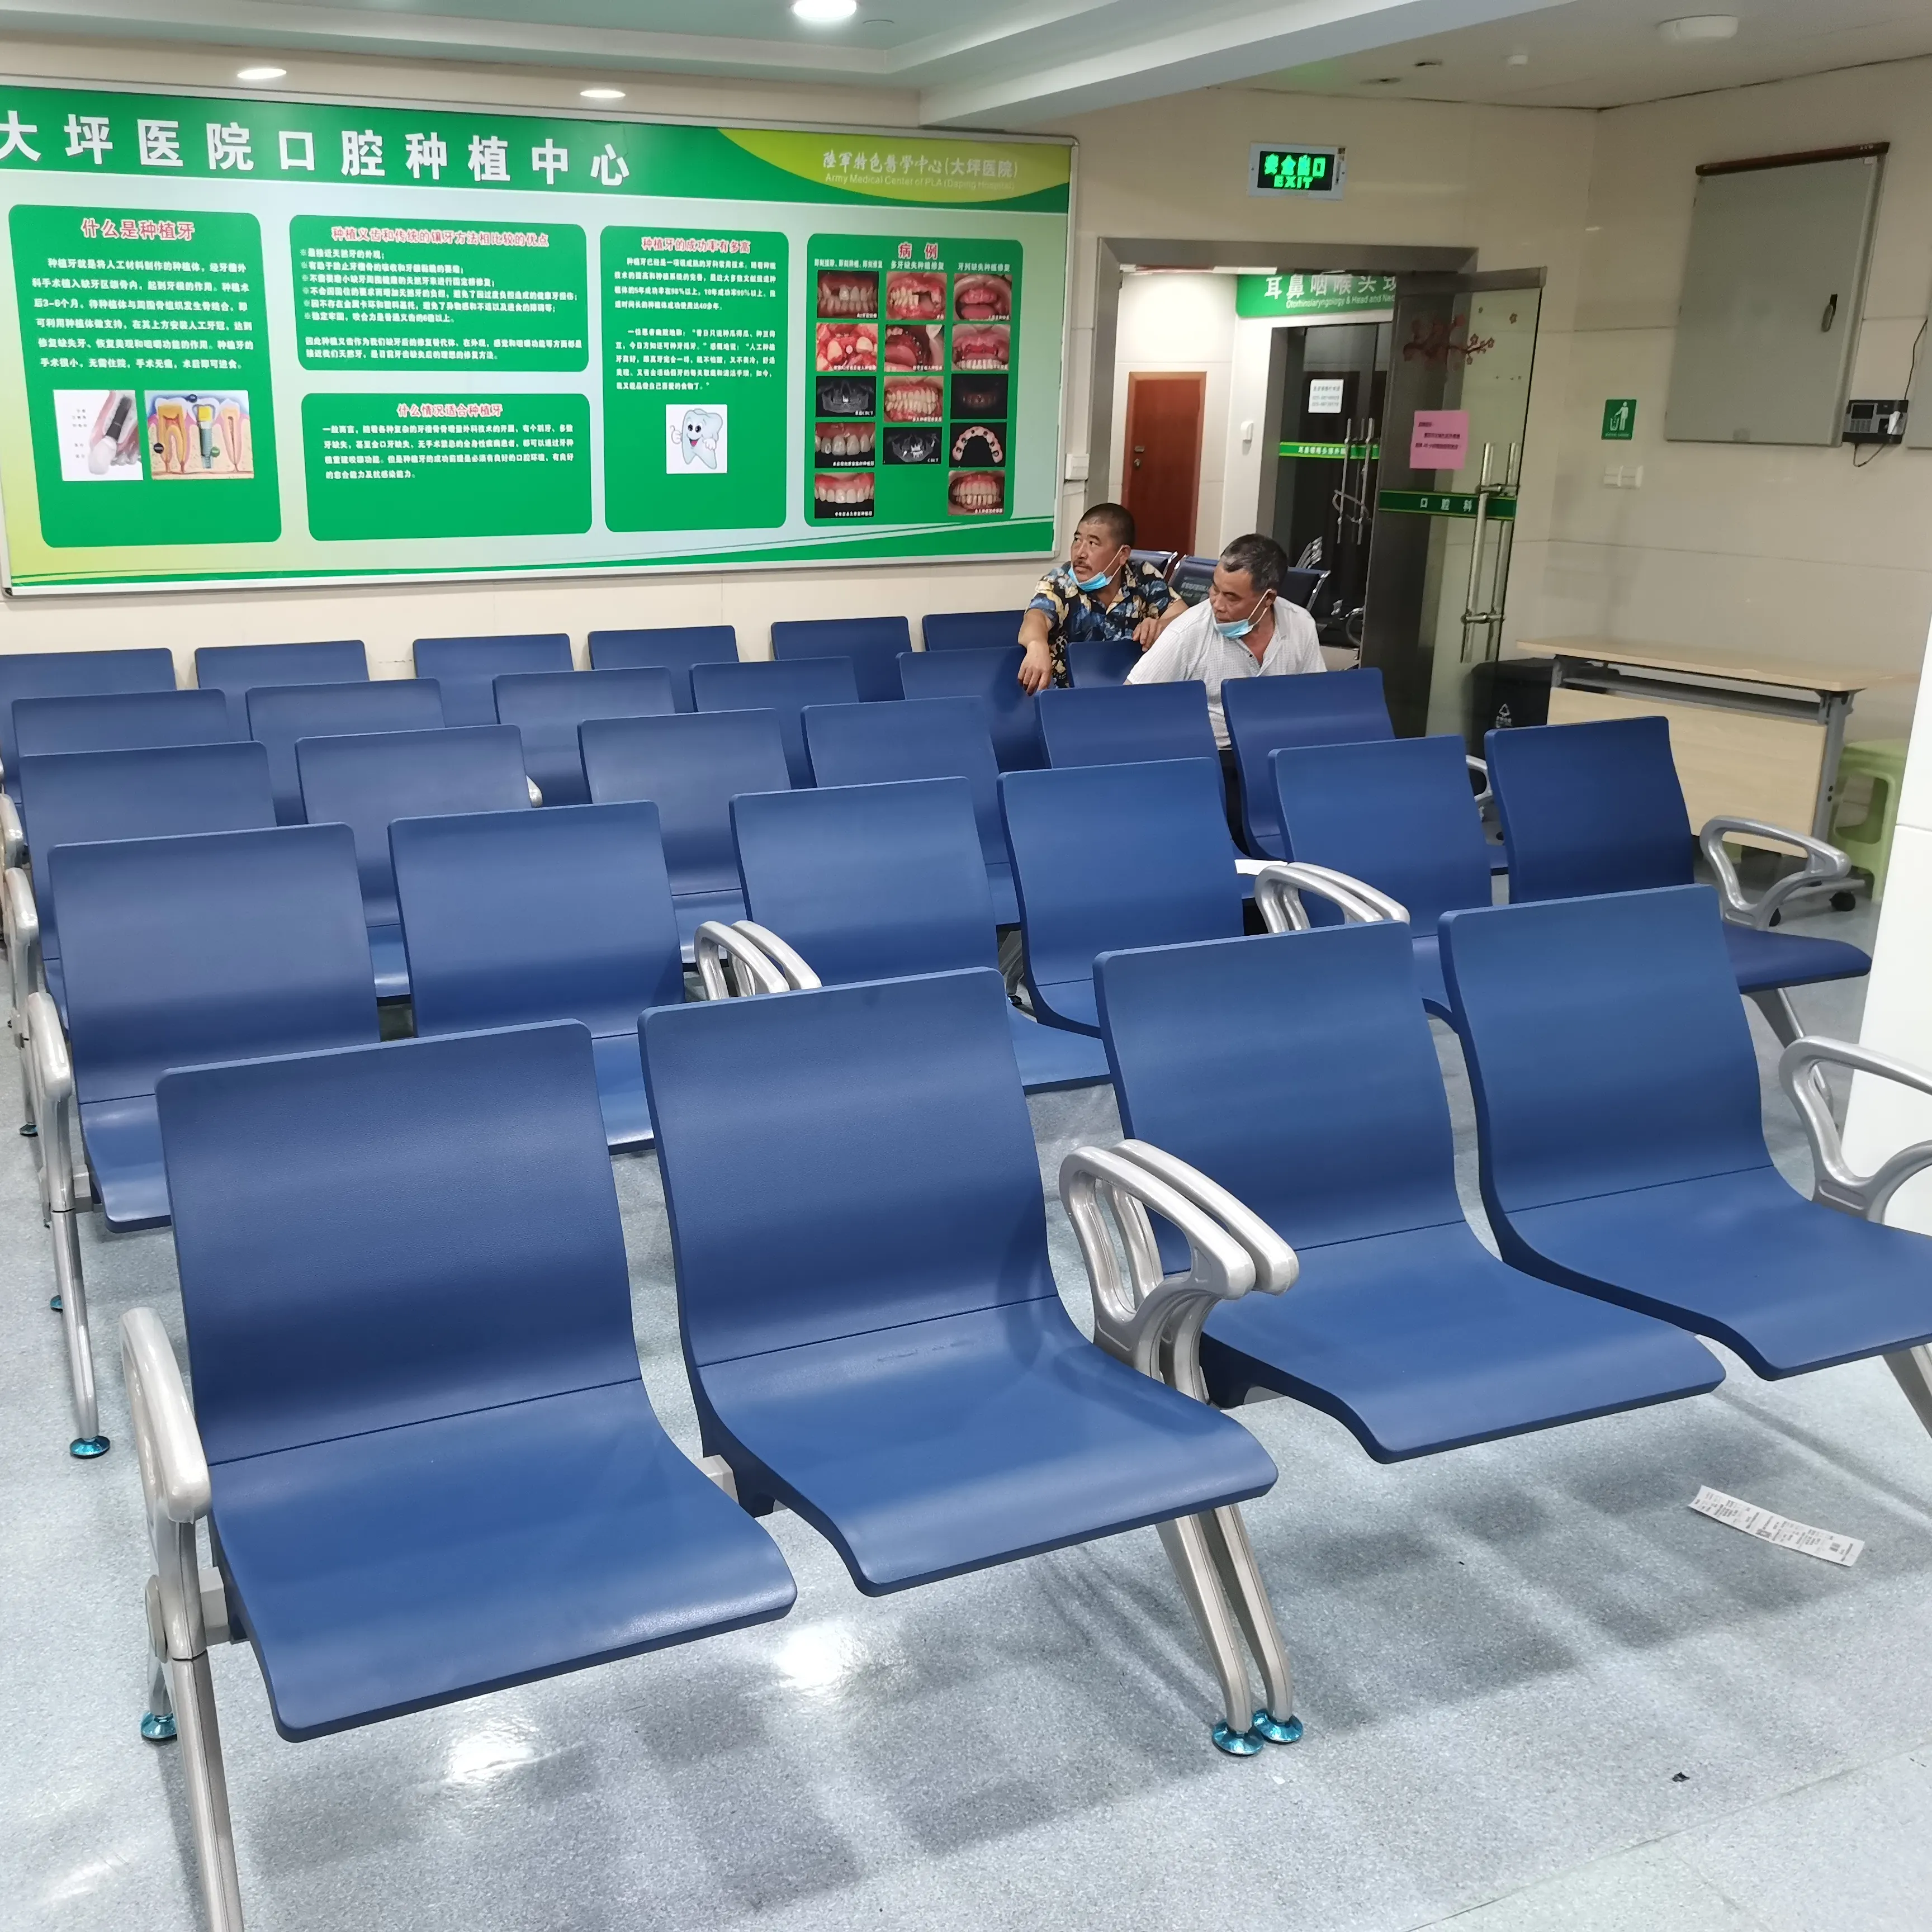 High Quality Commercial Polyurethane Waiting Chairs Gang Chairs For Hospital Waiting Room Airport Chair Area